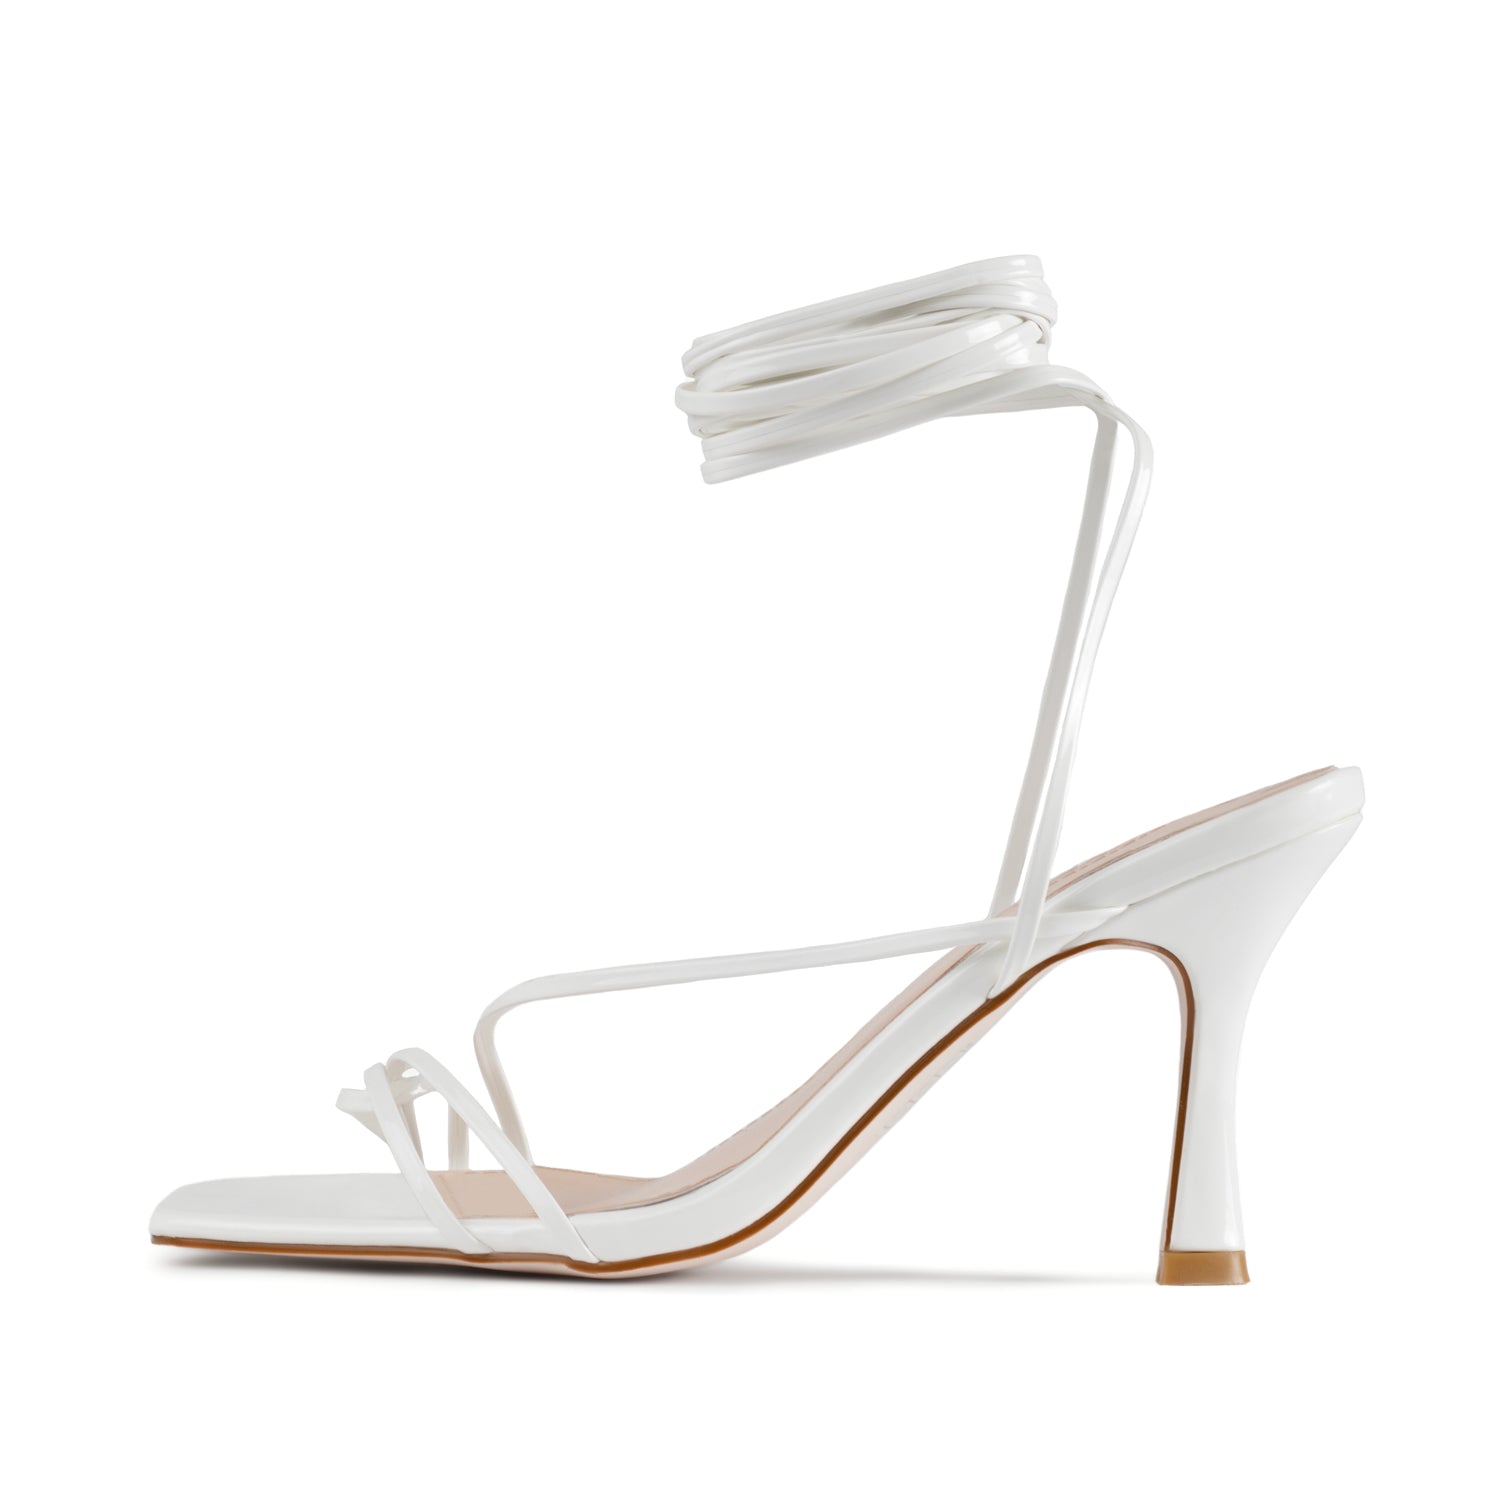 RAID Fane Lace-up Heeled Sandal in White Patent